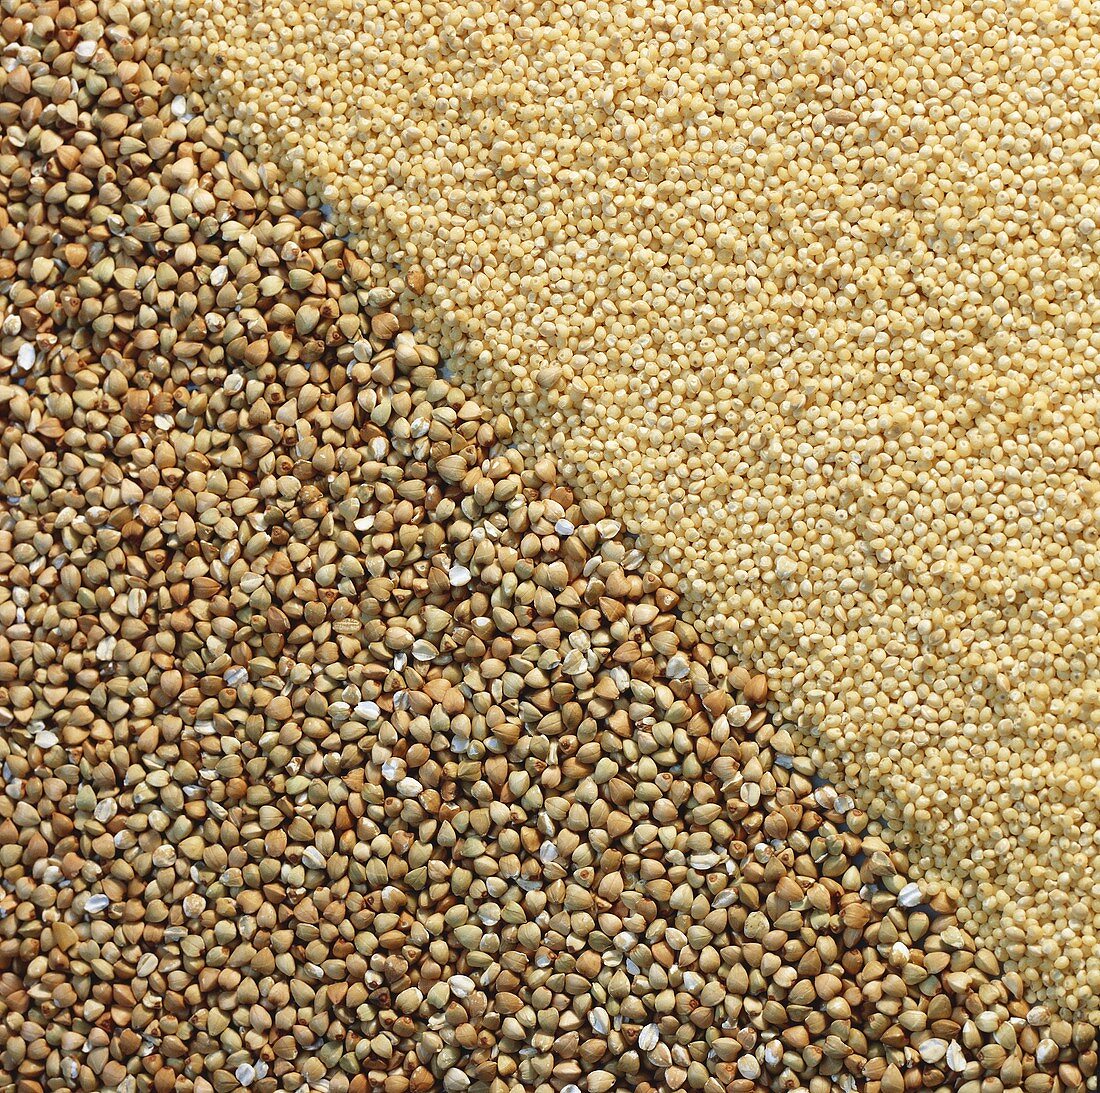 Buckwheat and Millet